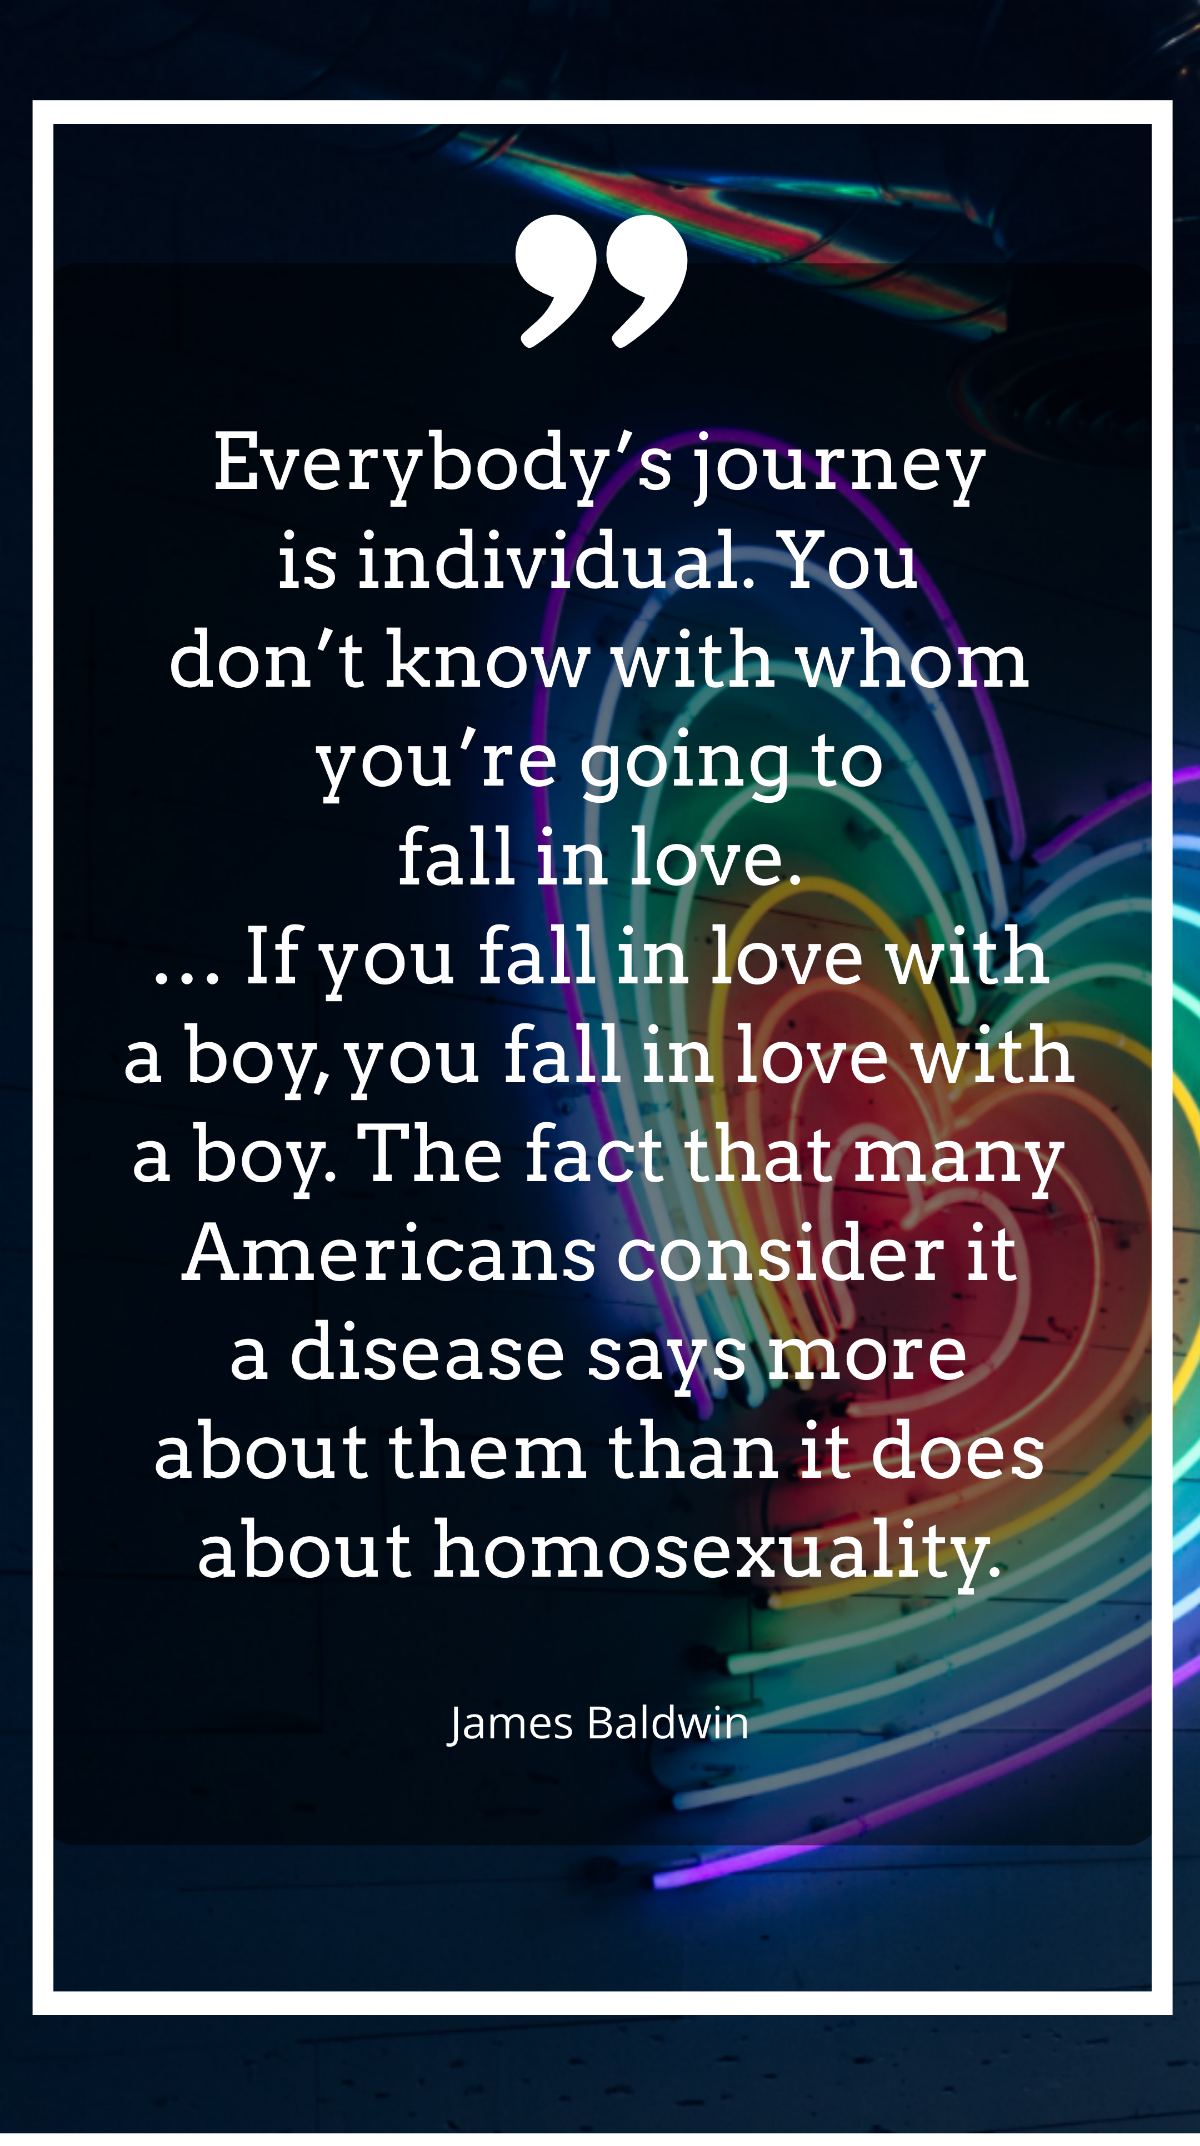 James Baldwin - Everybody’s journey is individual. You don’t know with whom you’re going to fall in love. … If you fall in love with a boy, you fall in love with a boy. The fact that many Americans co